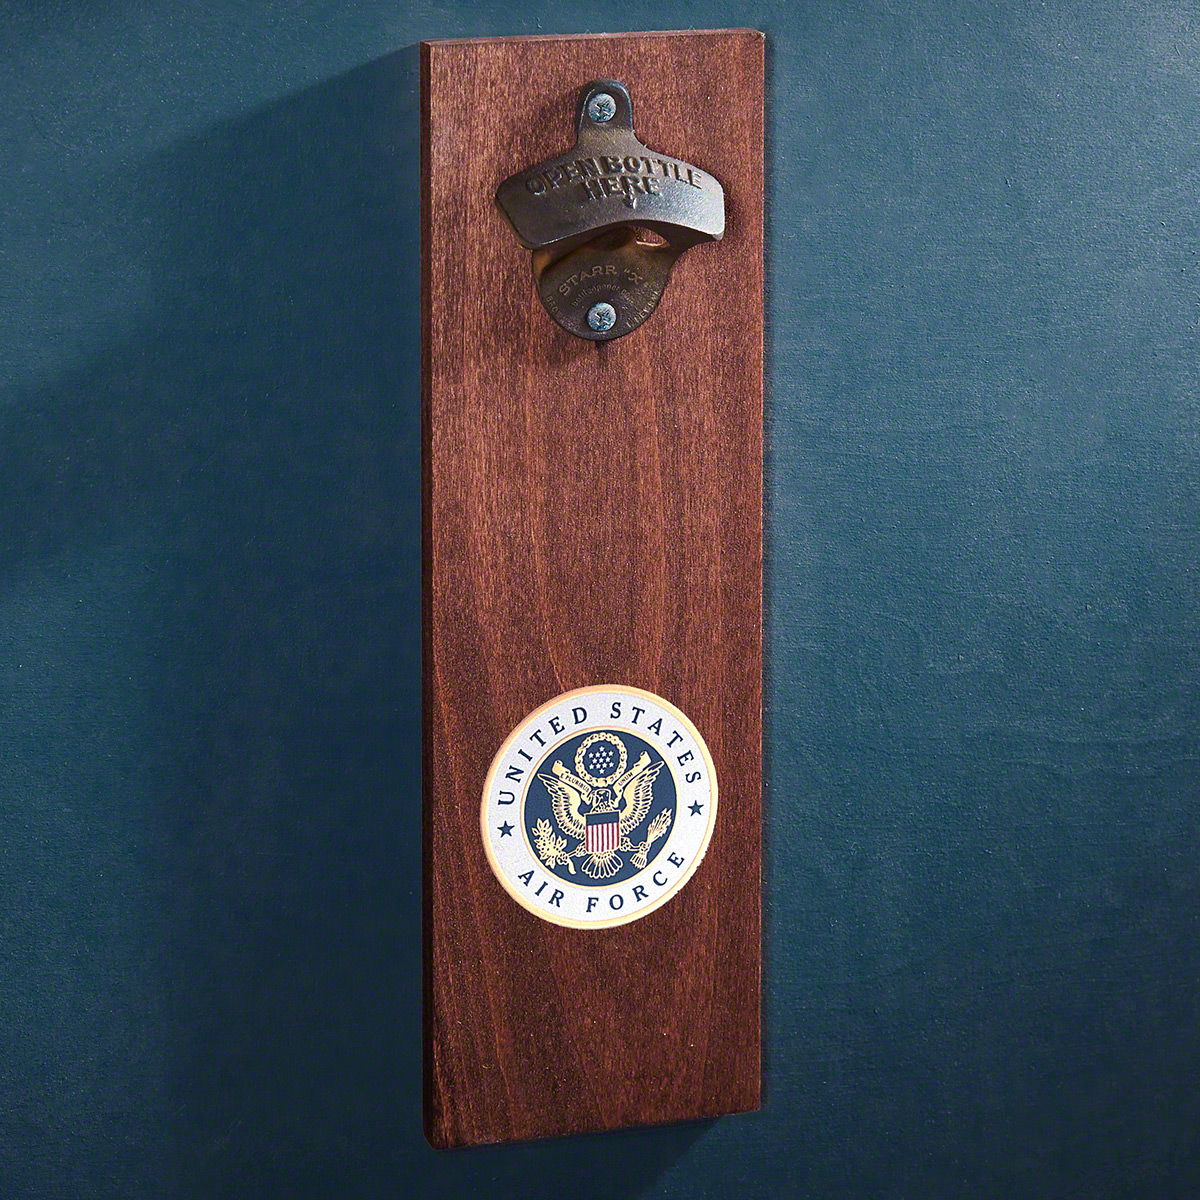 Air Force Crest Wall-Mounted Bottle Opener Gift for Military